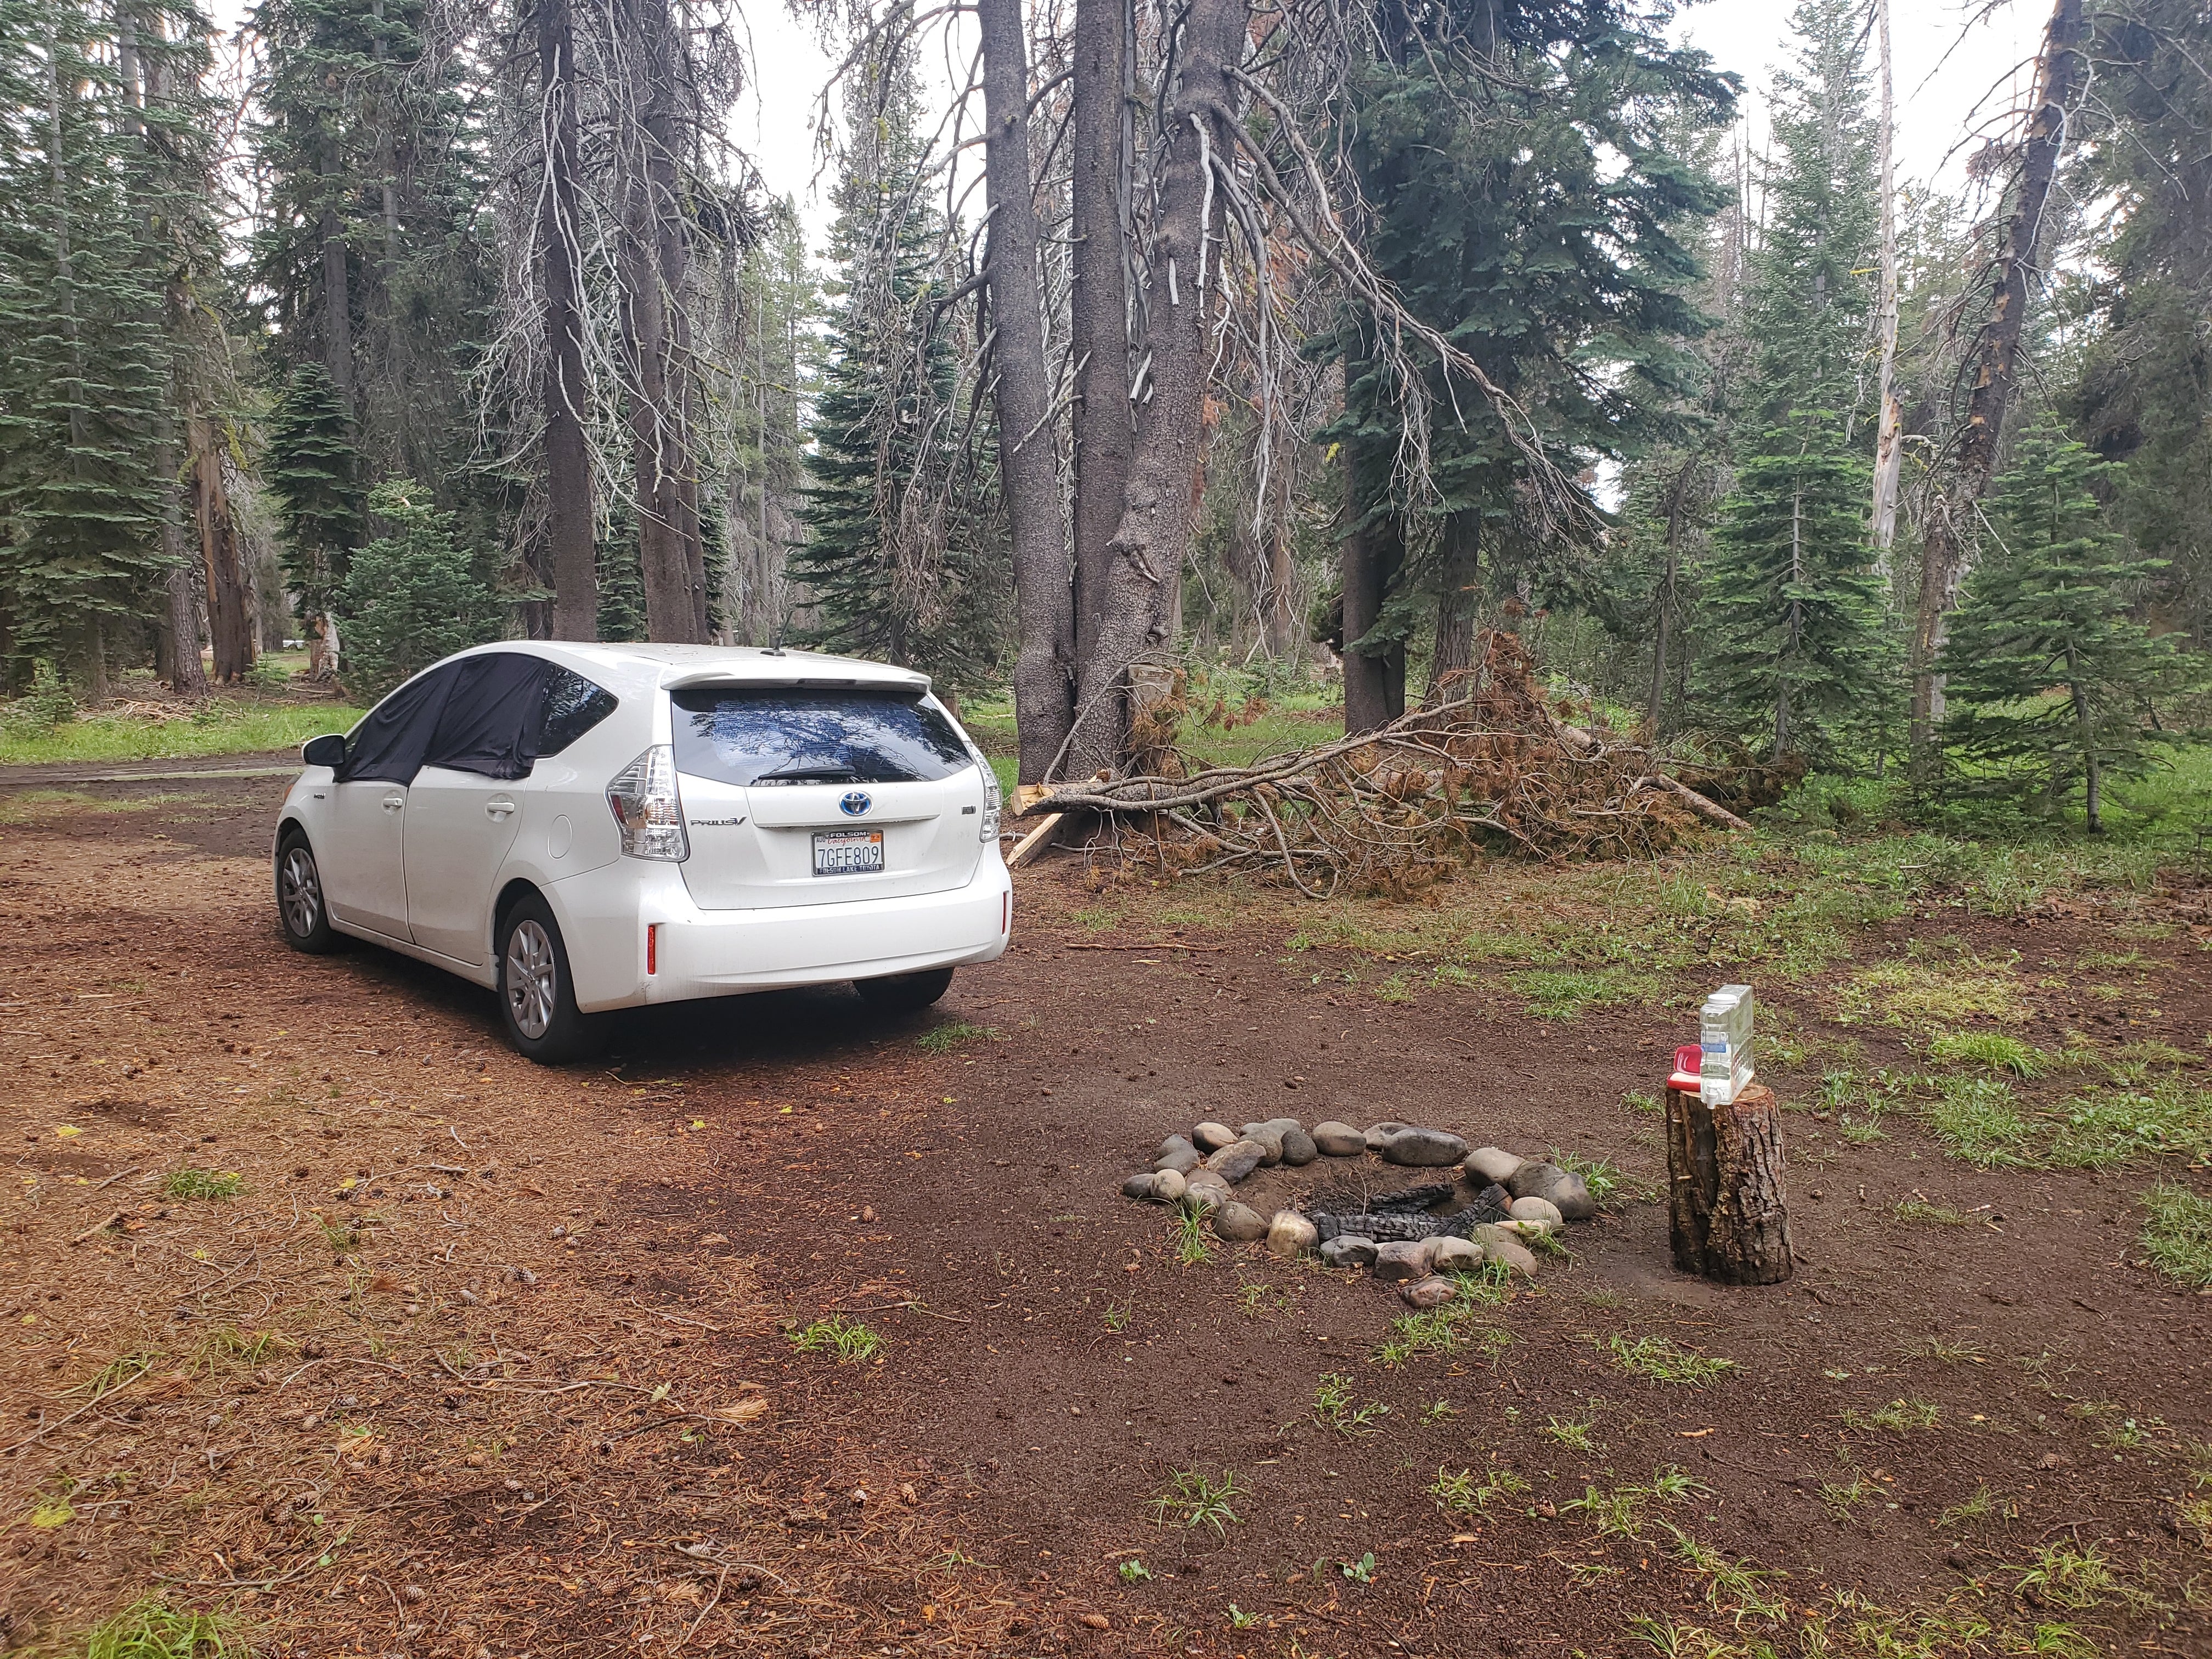 Camper submitted image from Bear Valley Dispersed Camping - 1